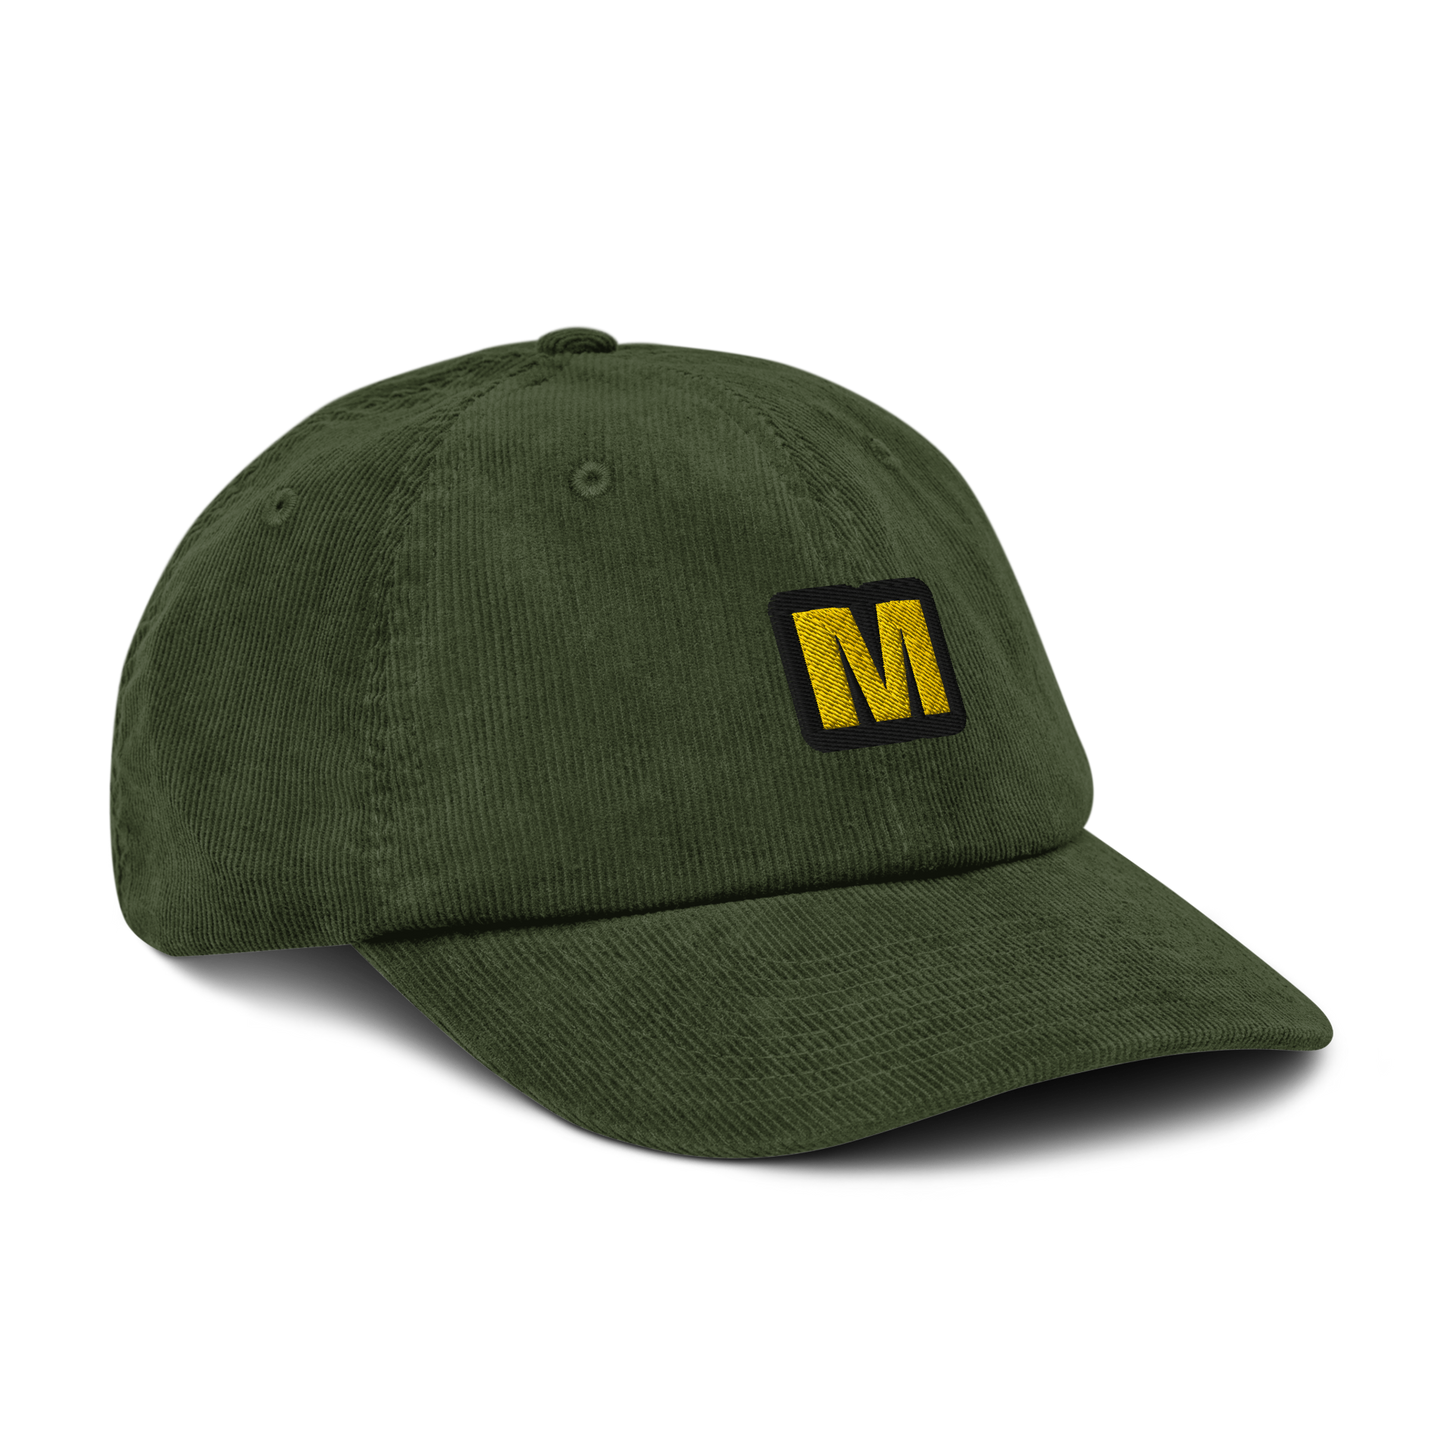 M - The letter collection - Corduroy hat